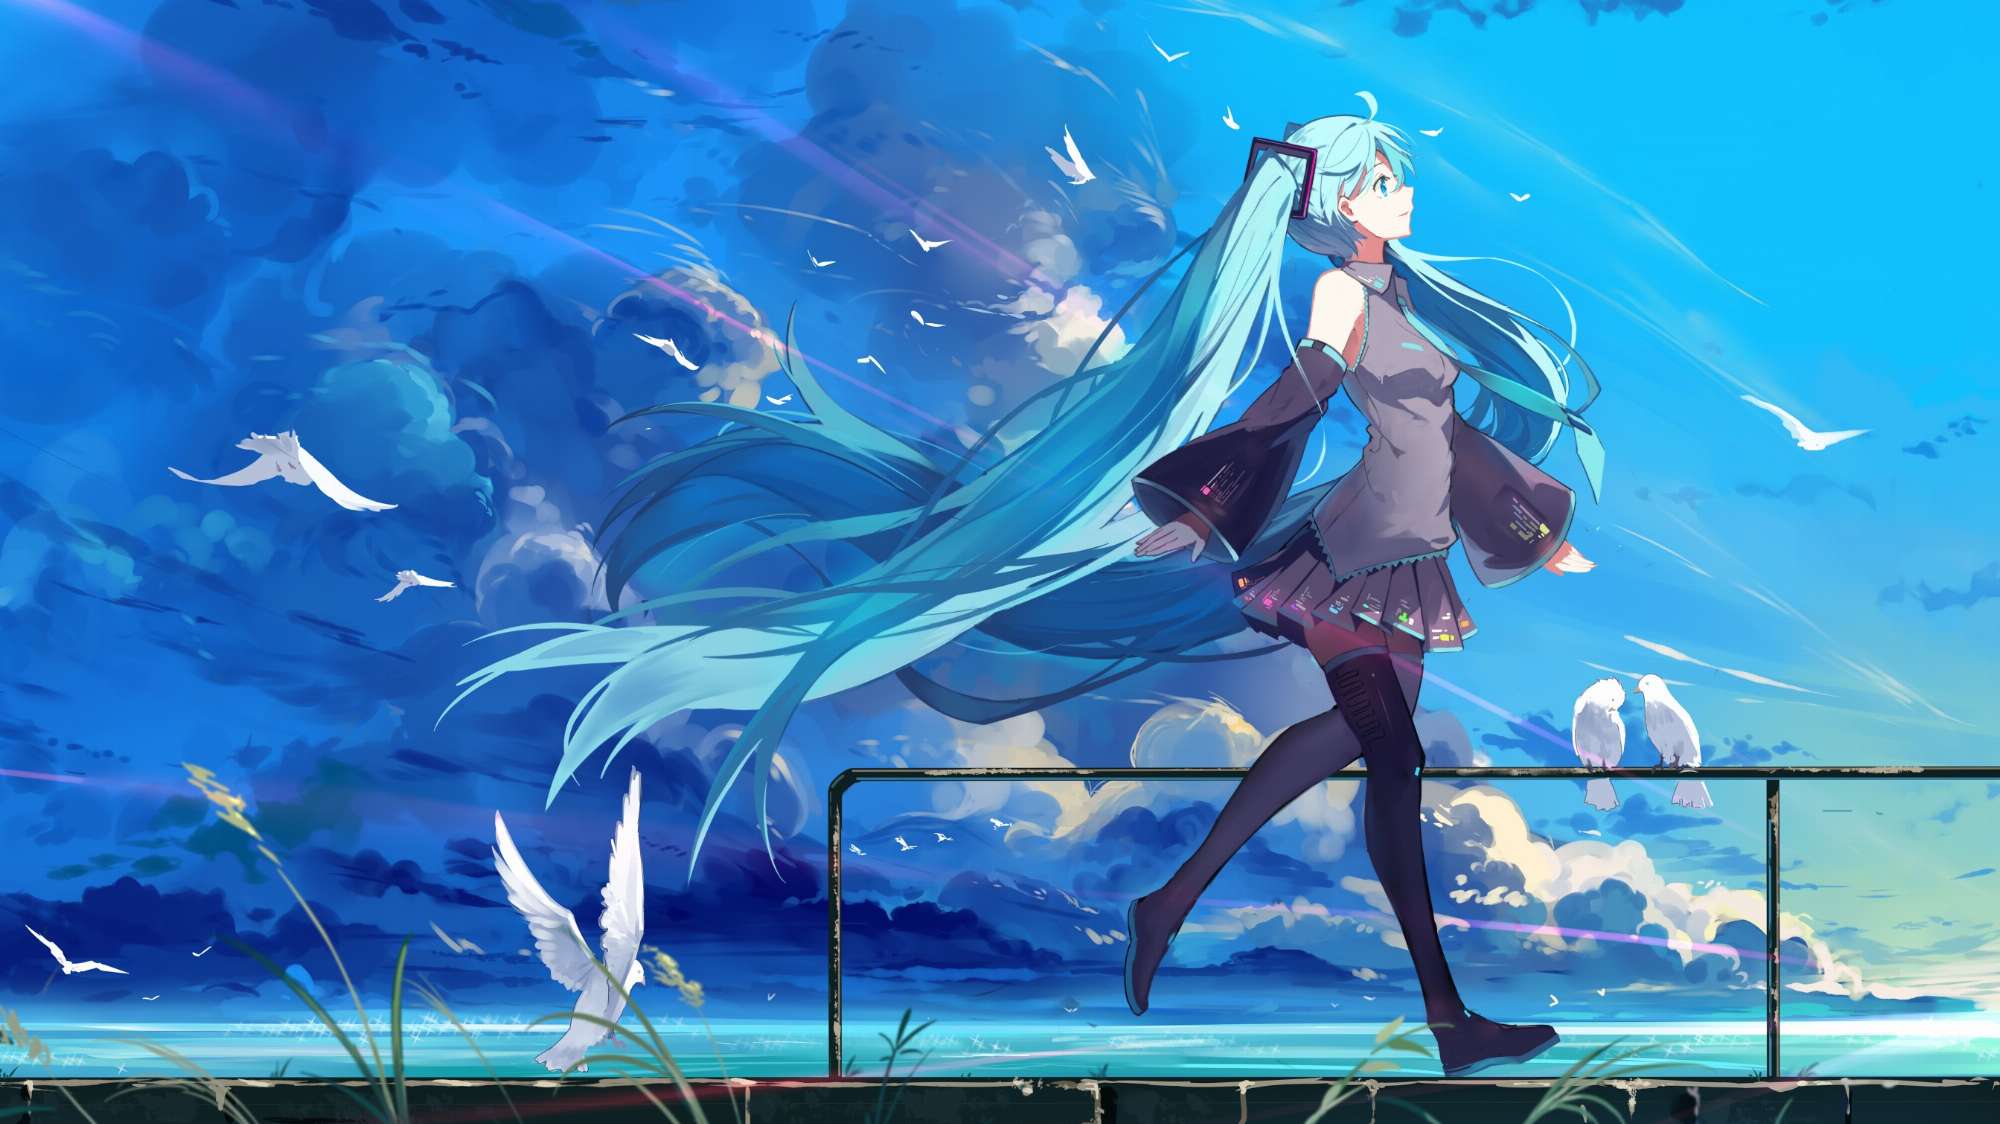 What is the appeal of Hatsune Miku? - Quora